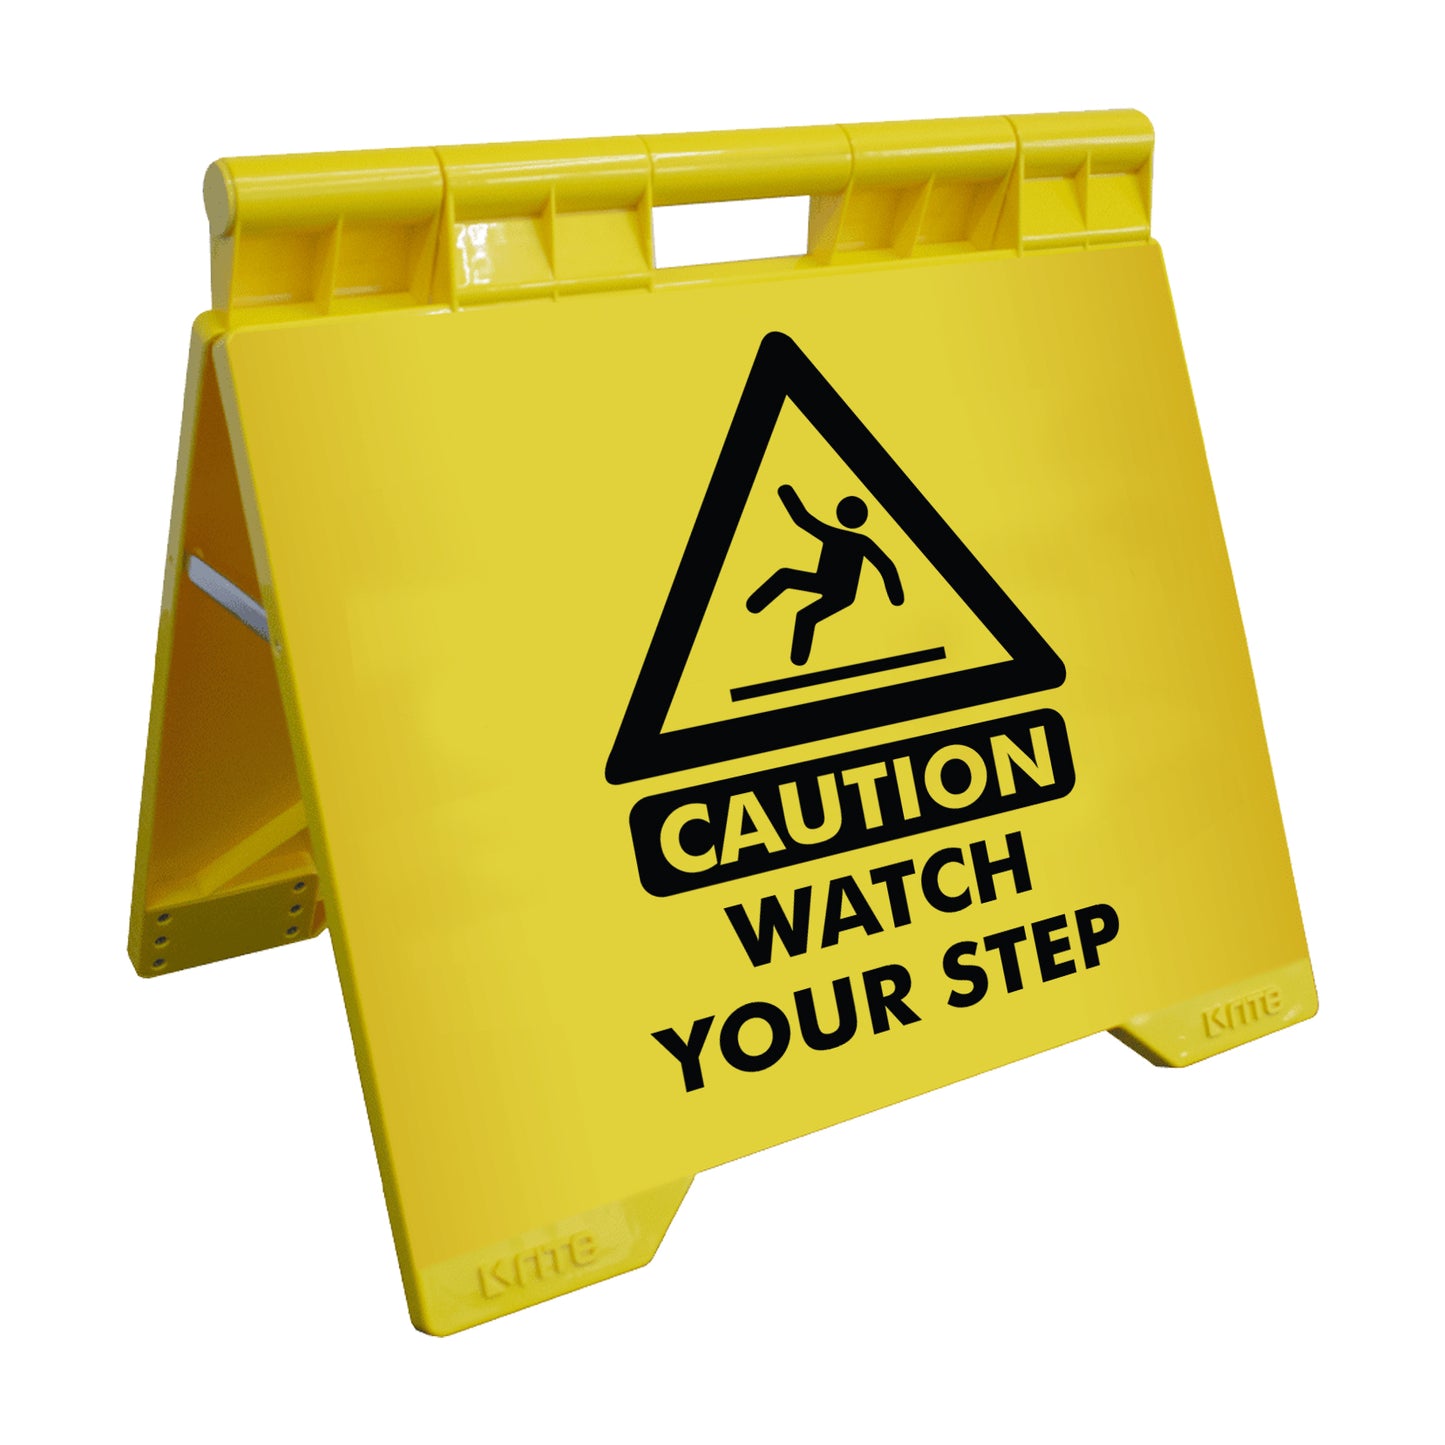 Caution Watch Your Step - Evarite A-Frame Sign